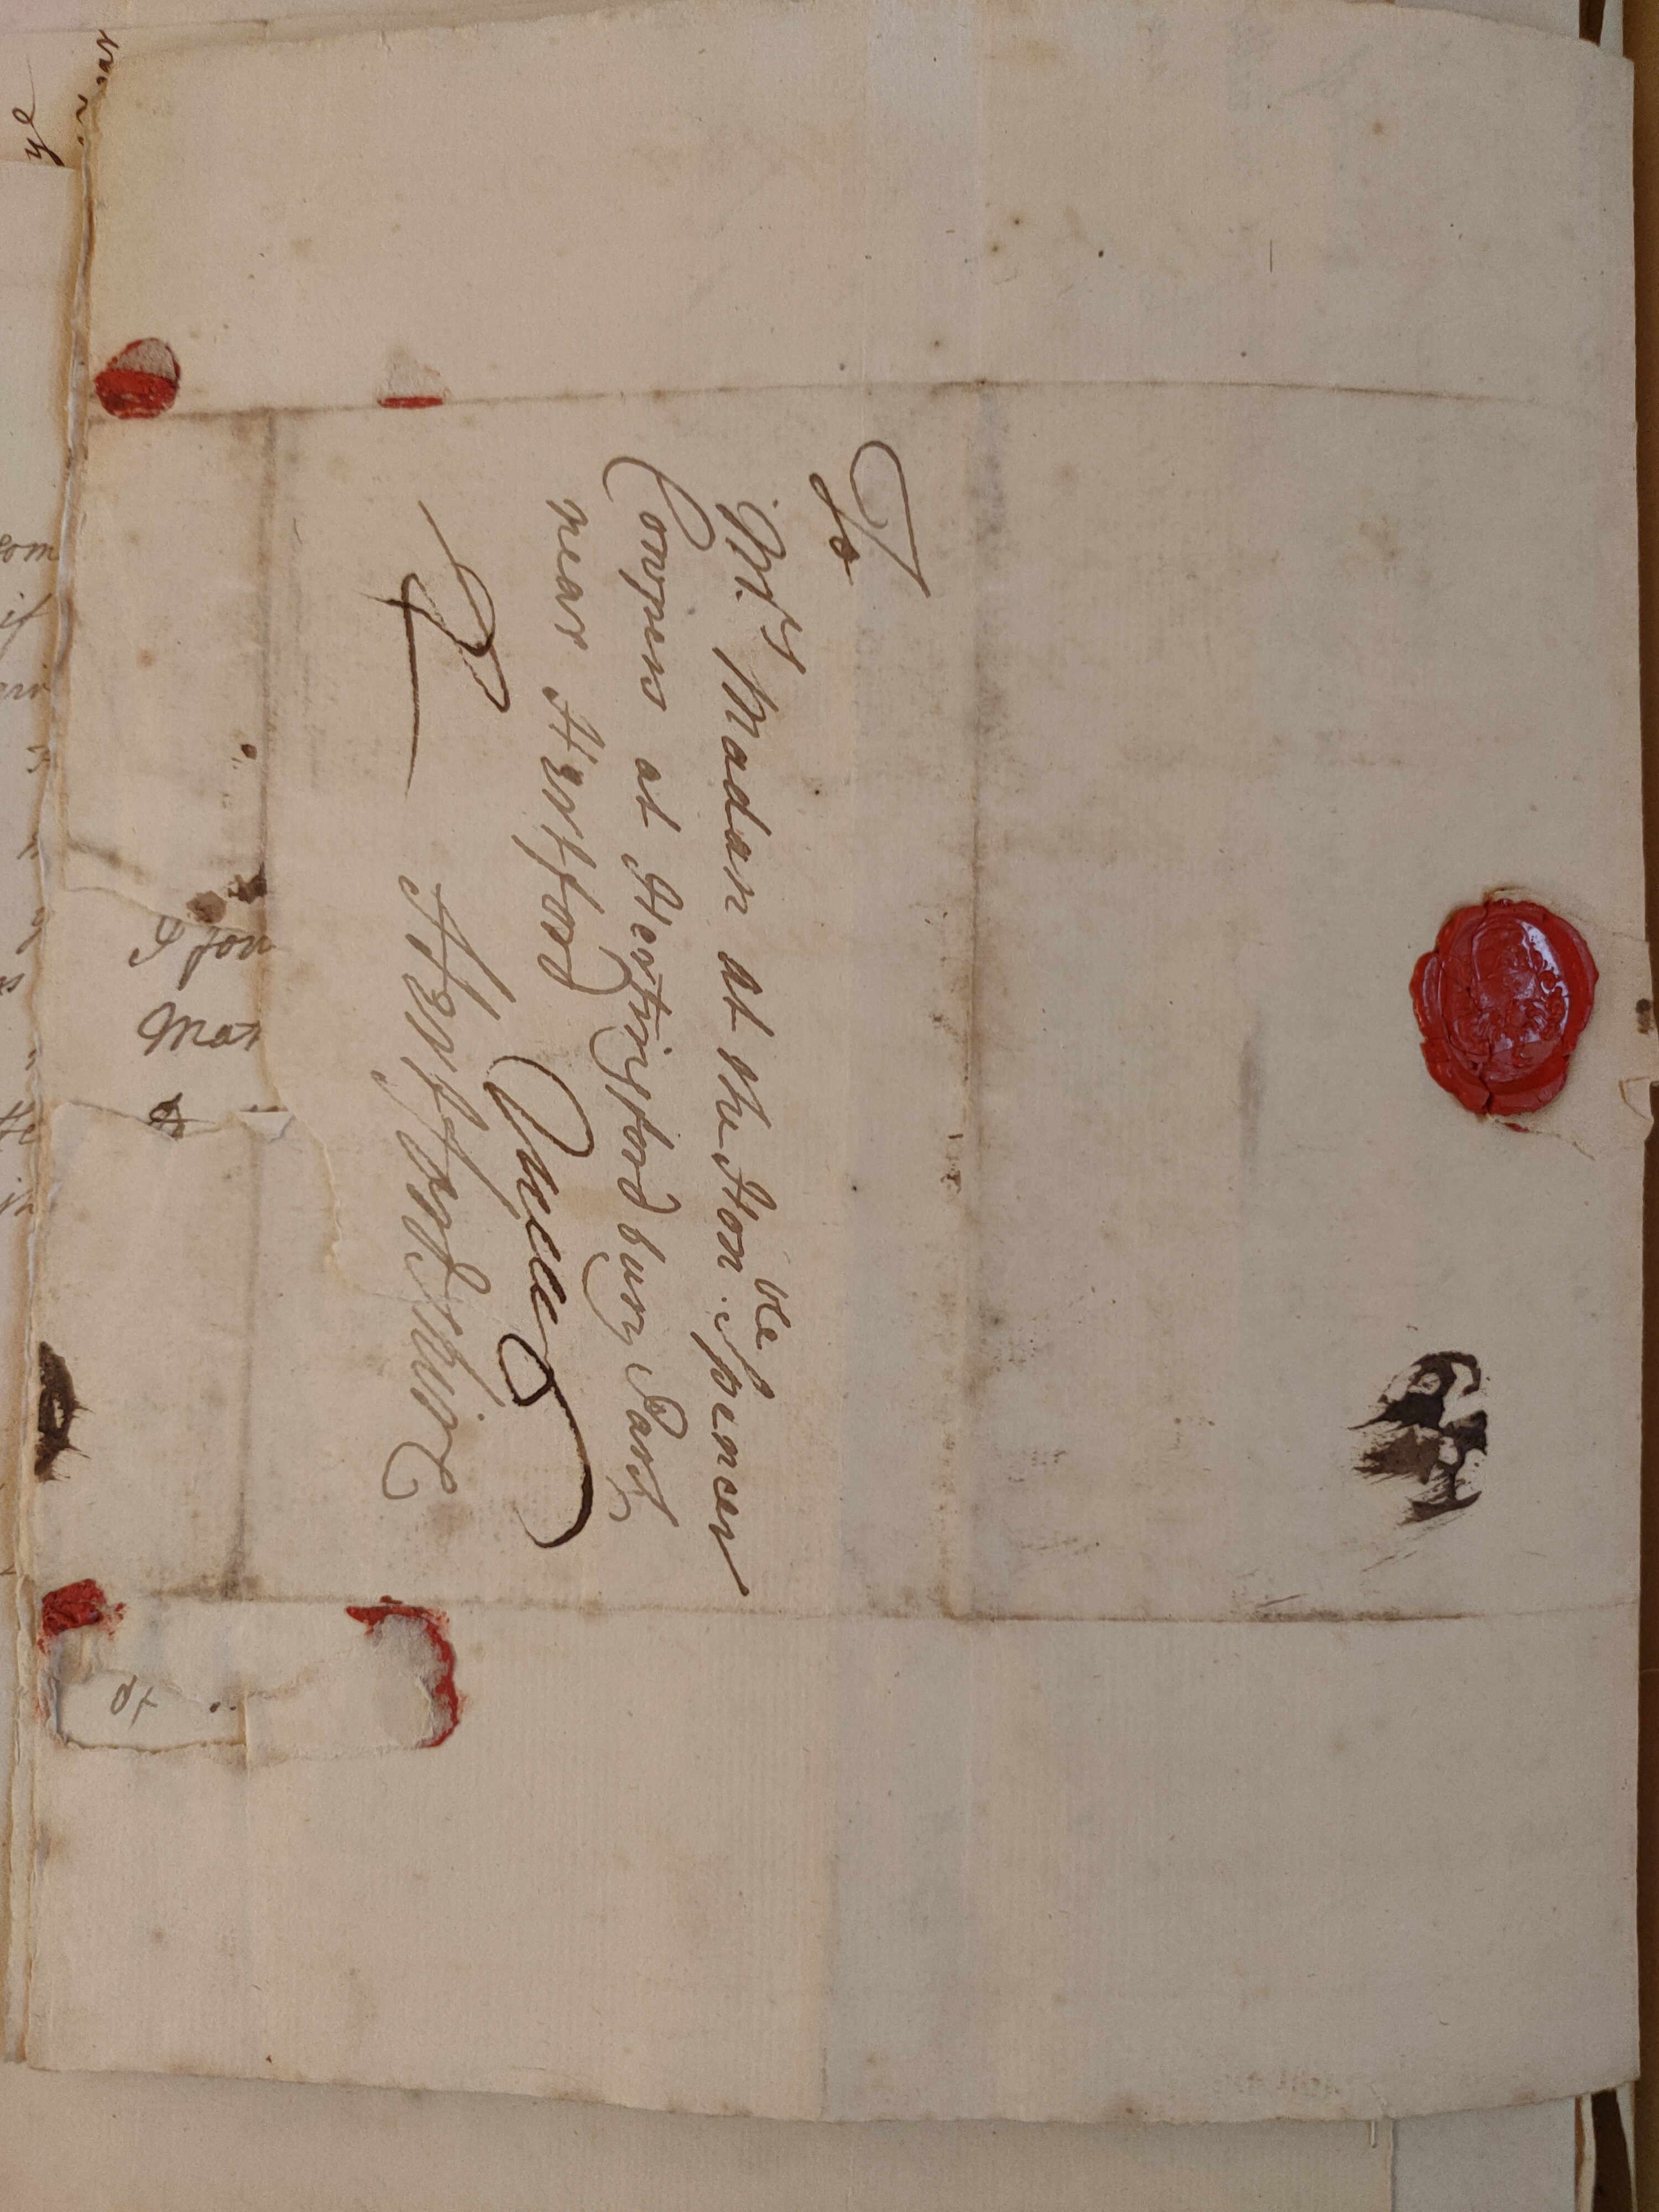 Image #4 of letter: Martin Madan to Judith Madan, 21 March 1726